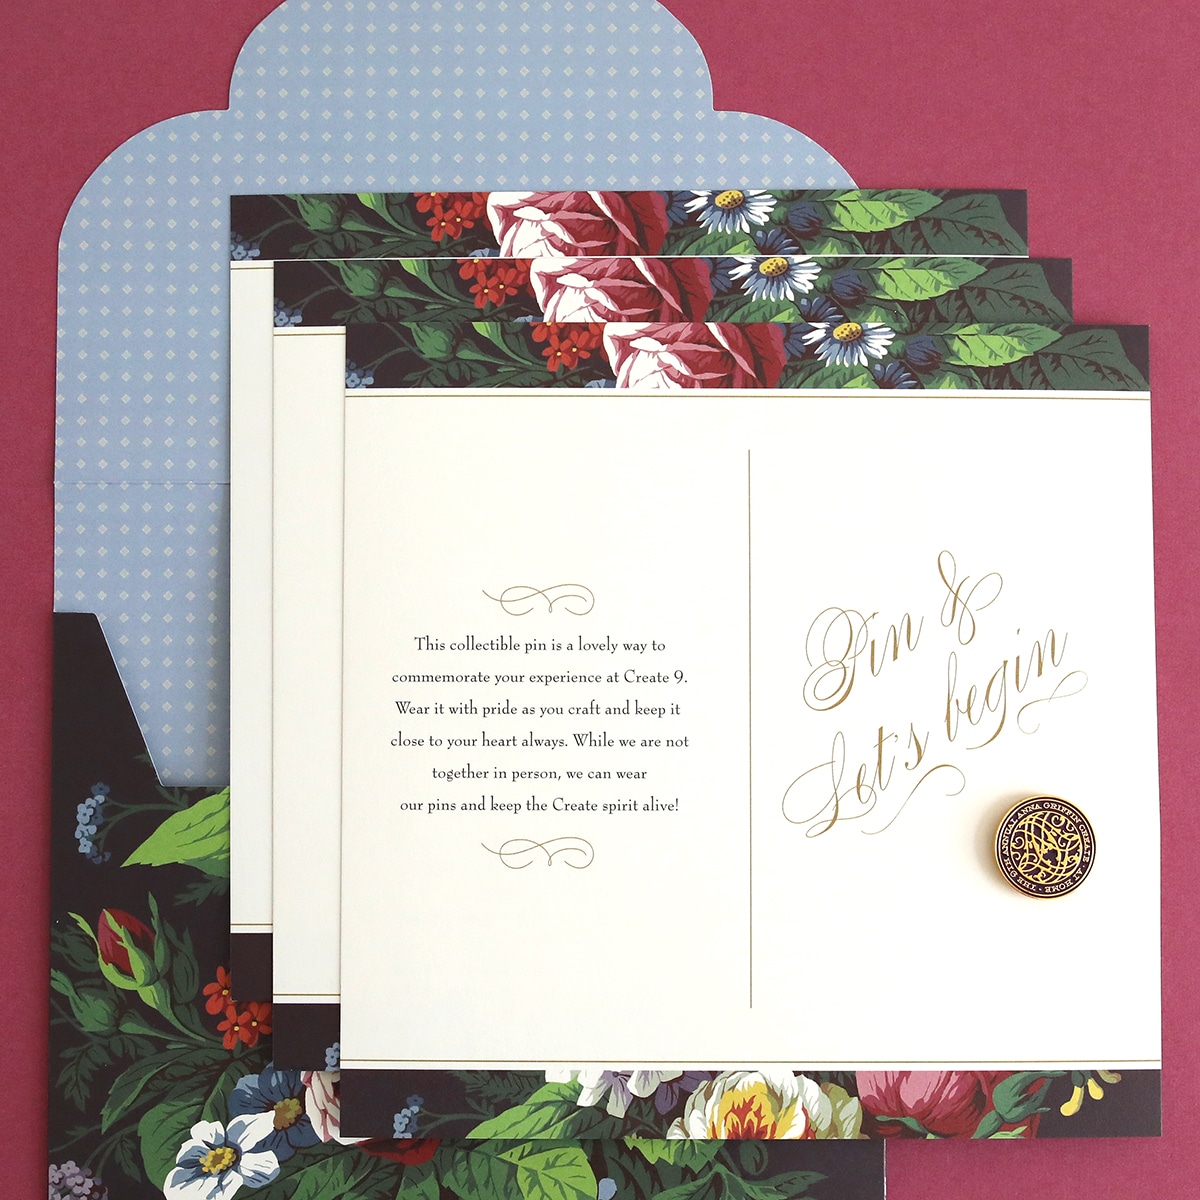 A set of floral wedding invitations with a button.